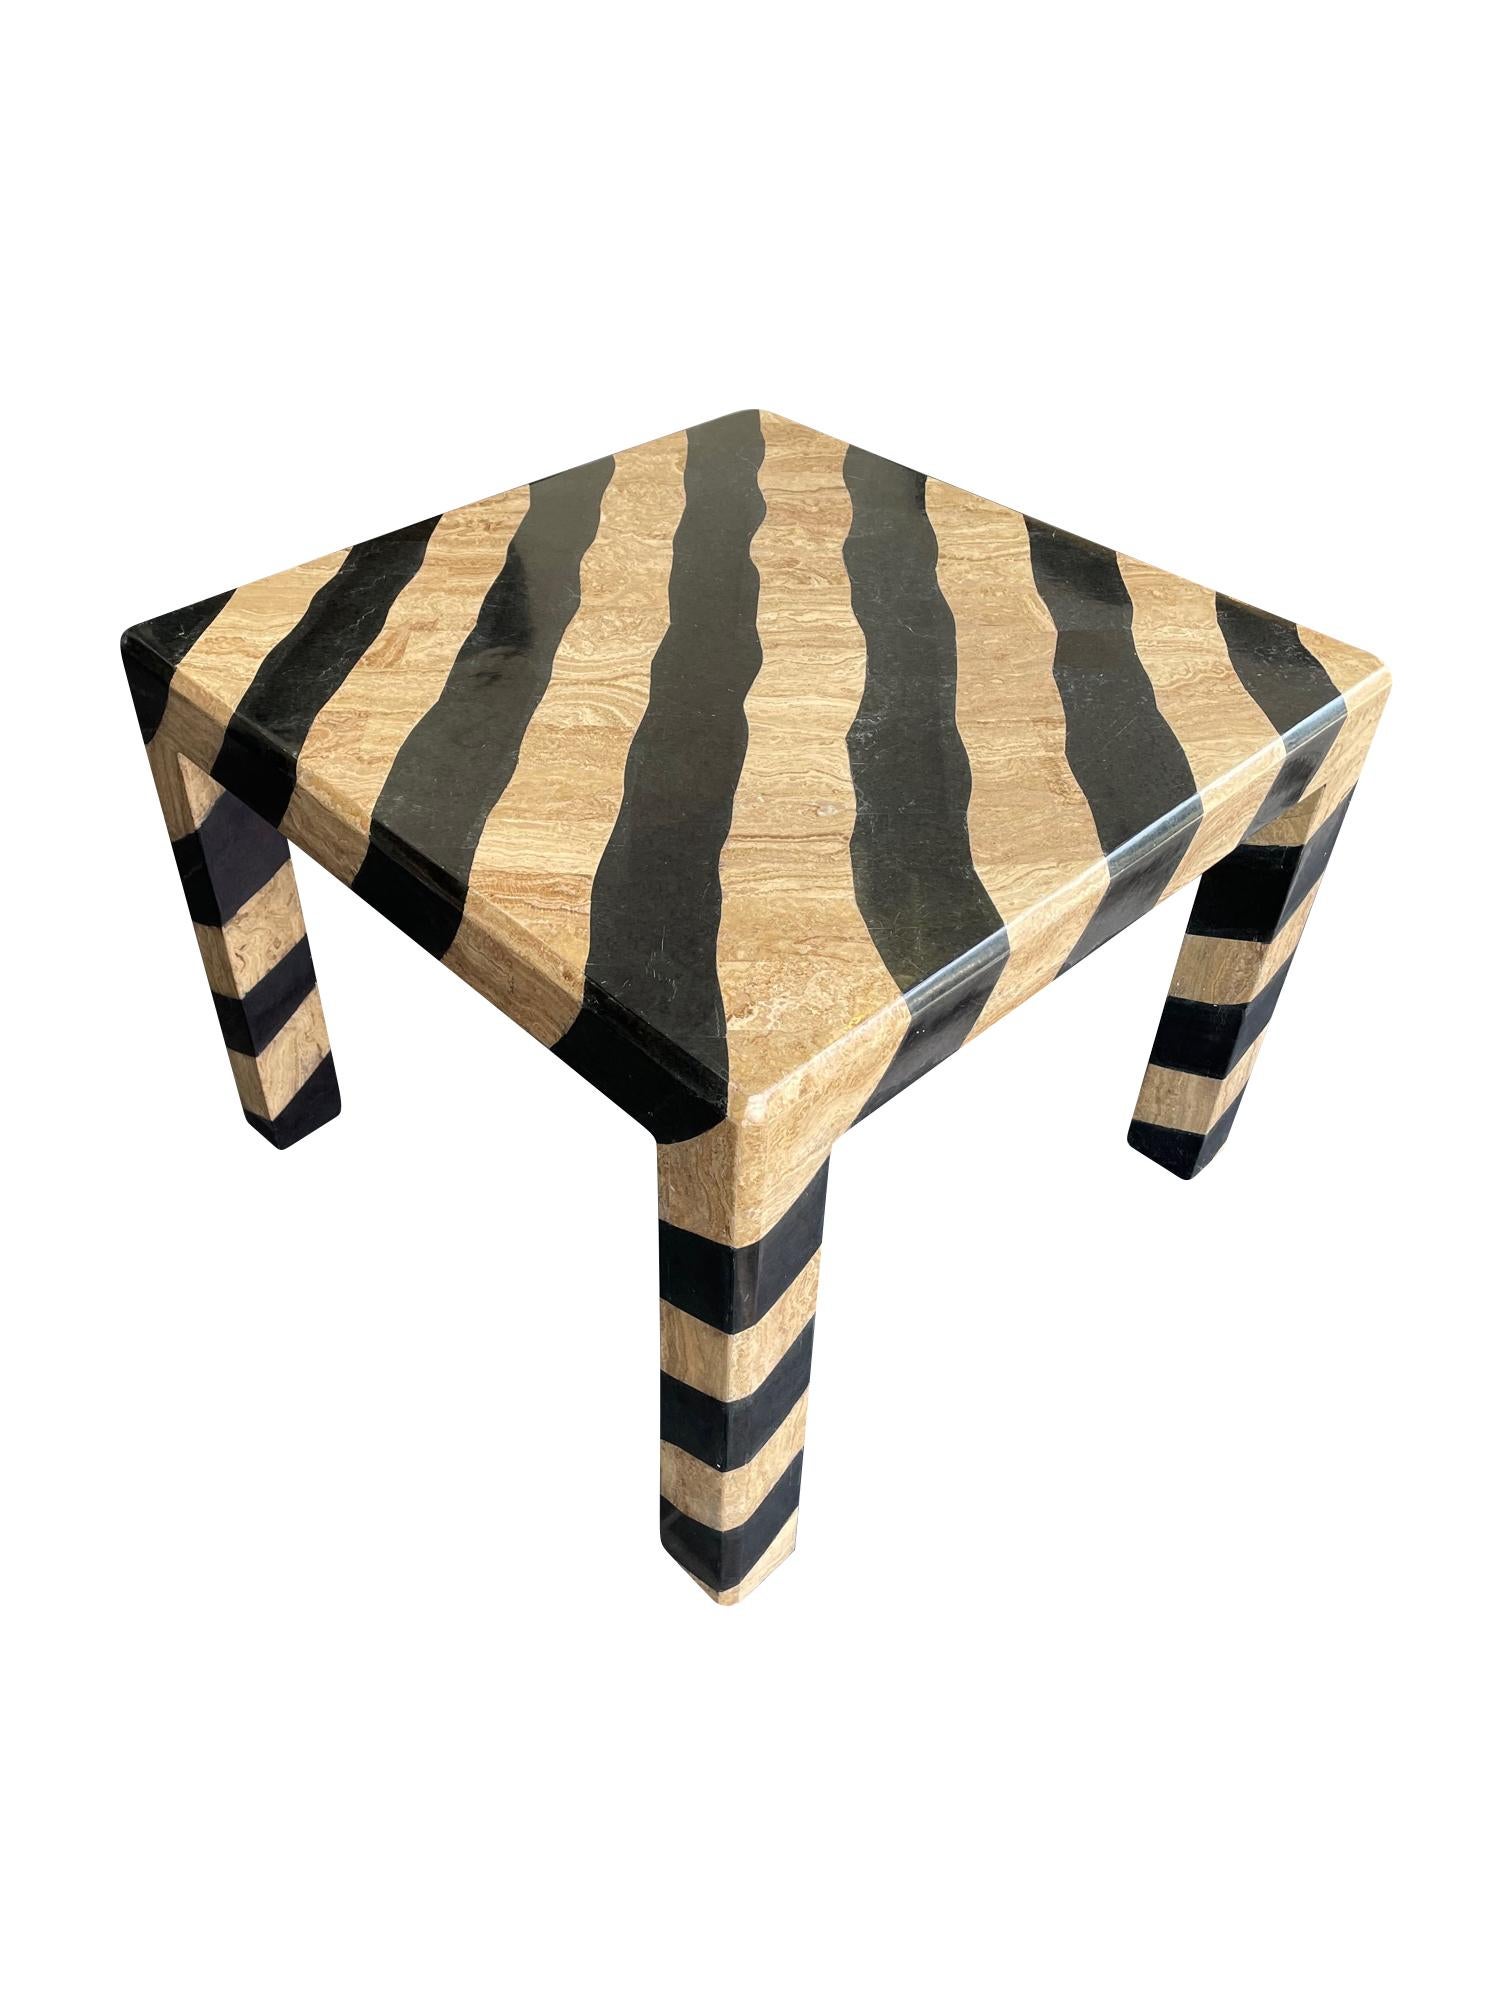 A 1970's Maitland Smith coffee table with zebra pattern tessellated marble finish. The detail and quality of work is fantastic to create large stripes over the whole table and legs.